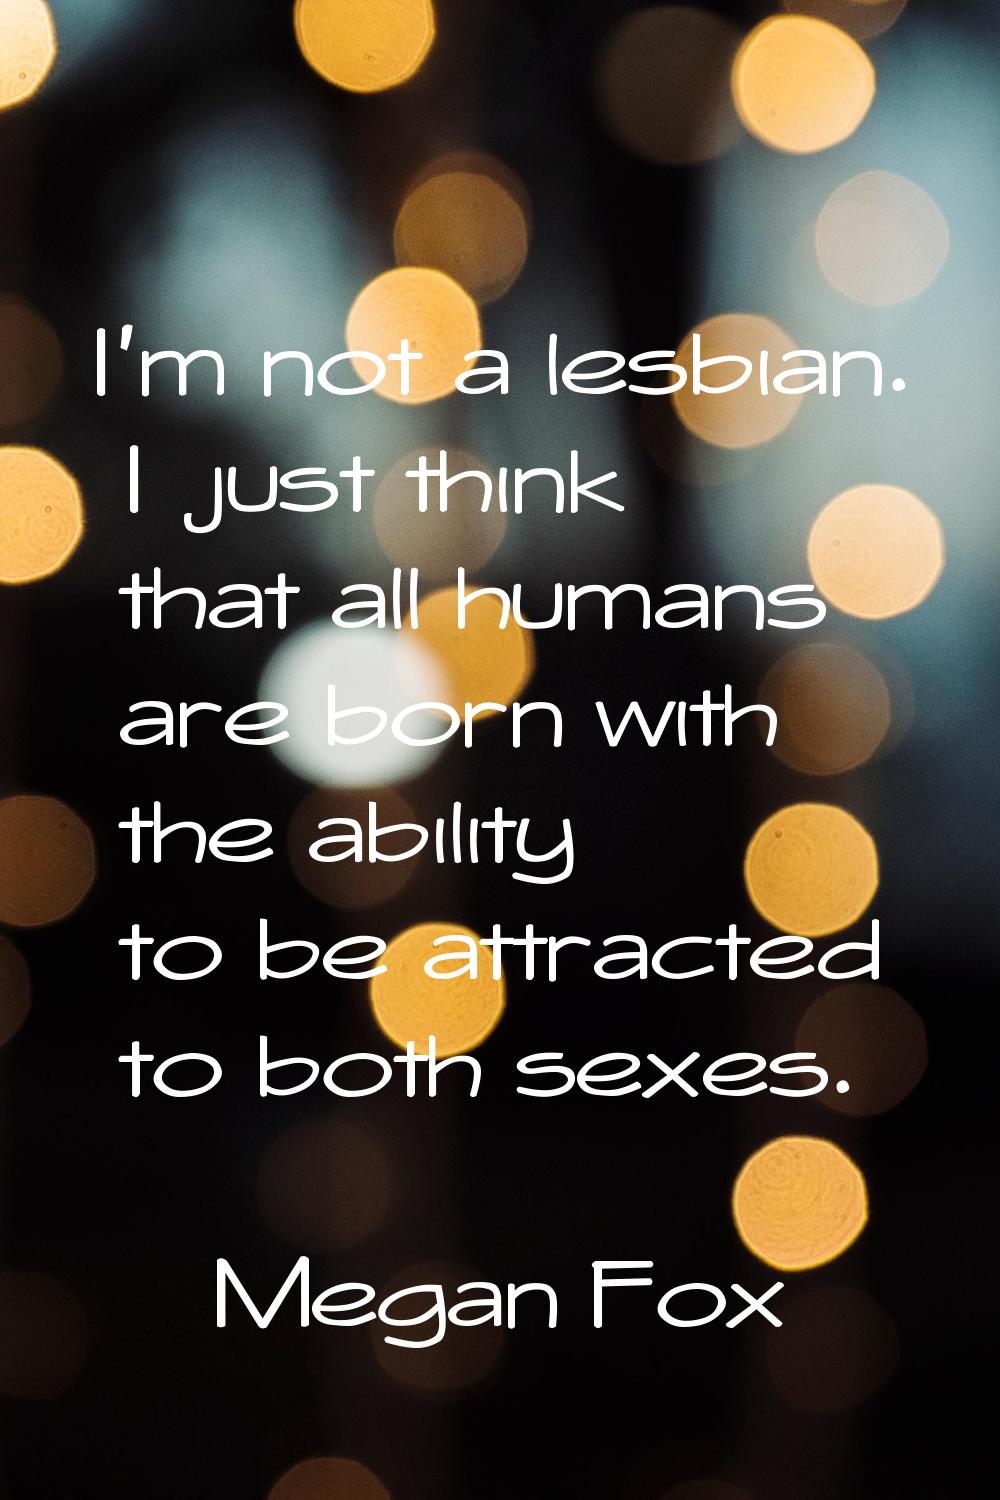 I'm not a lesbian. I just think that all humans are born with the ability to be attracted to both s